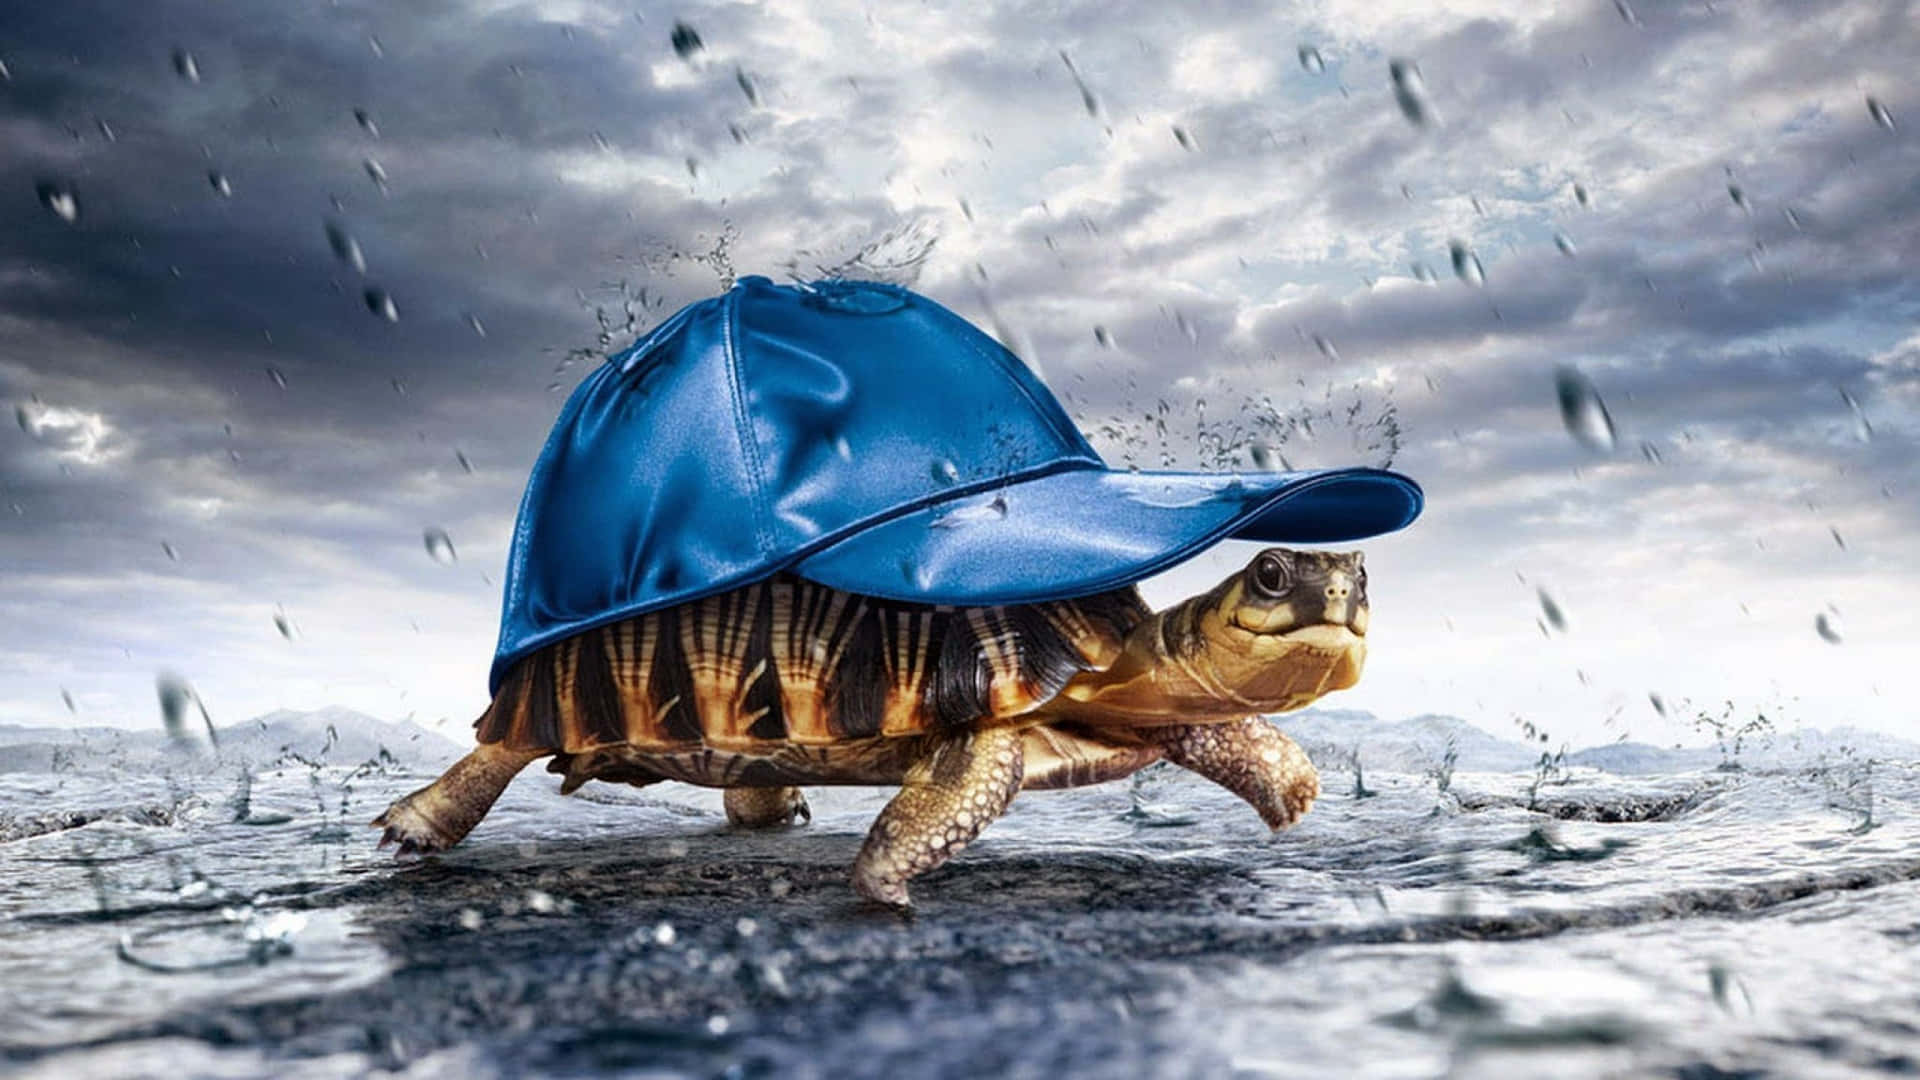 Turtle With A Blue Cap Fantasy Art Background